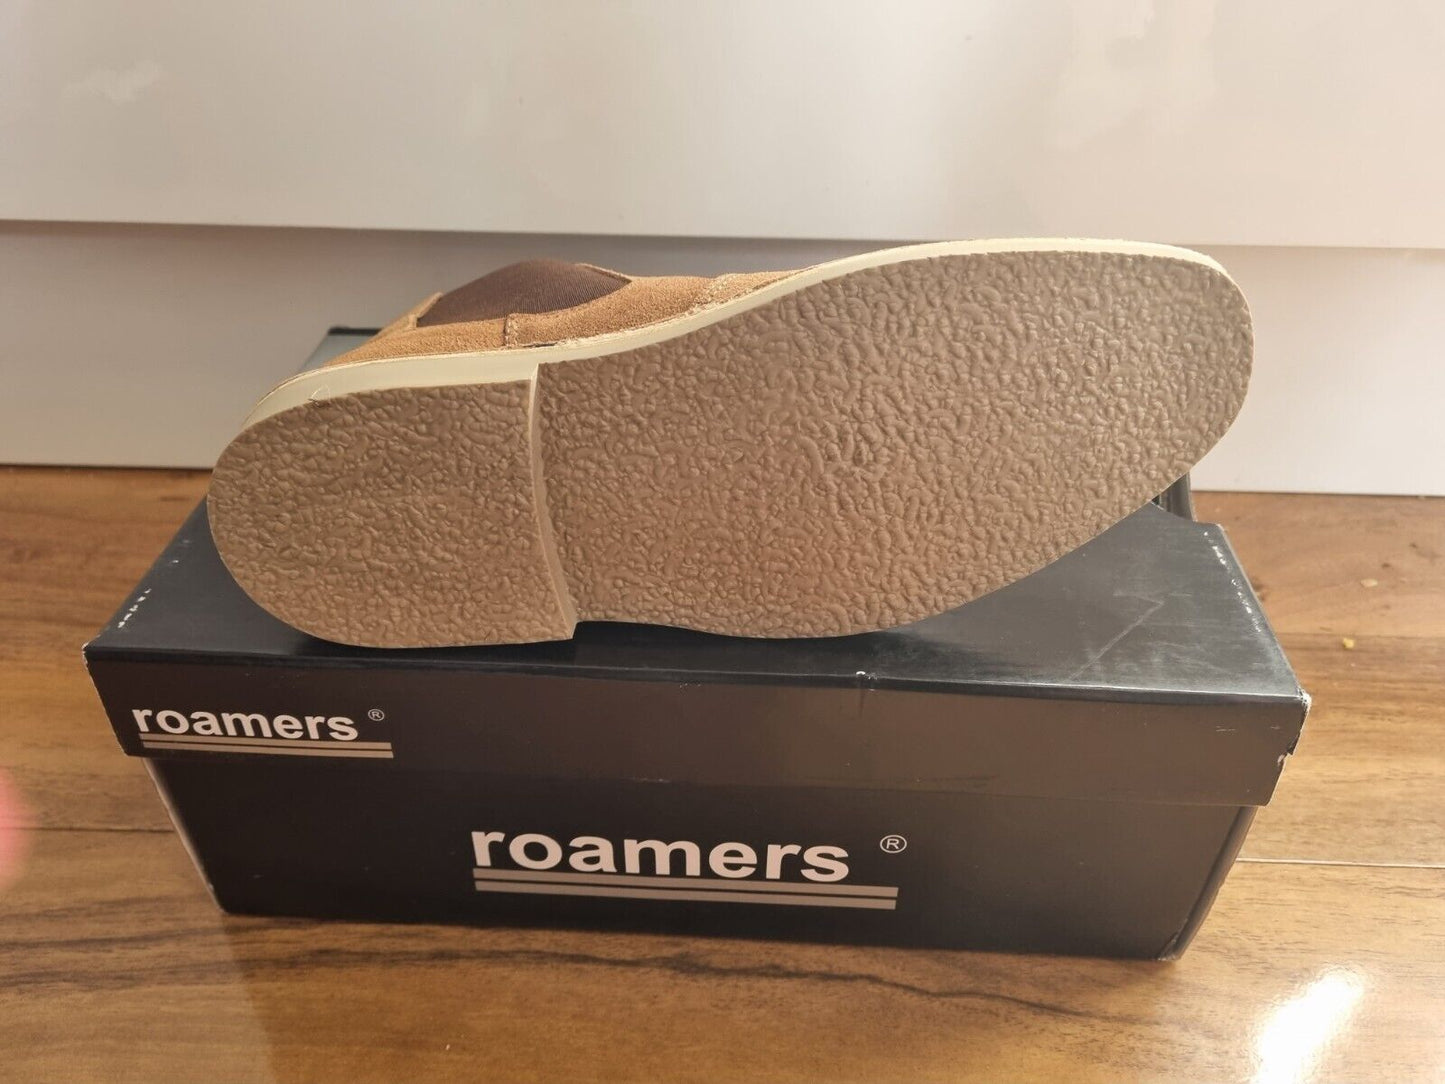 Desert Boot by Roamers - Chelsea - Taupe Suede Leather (M765BS)